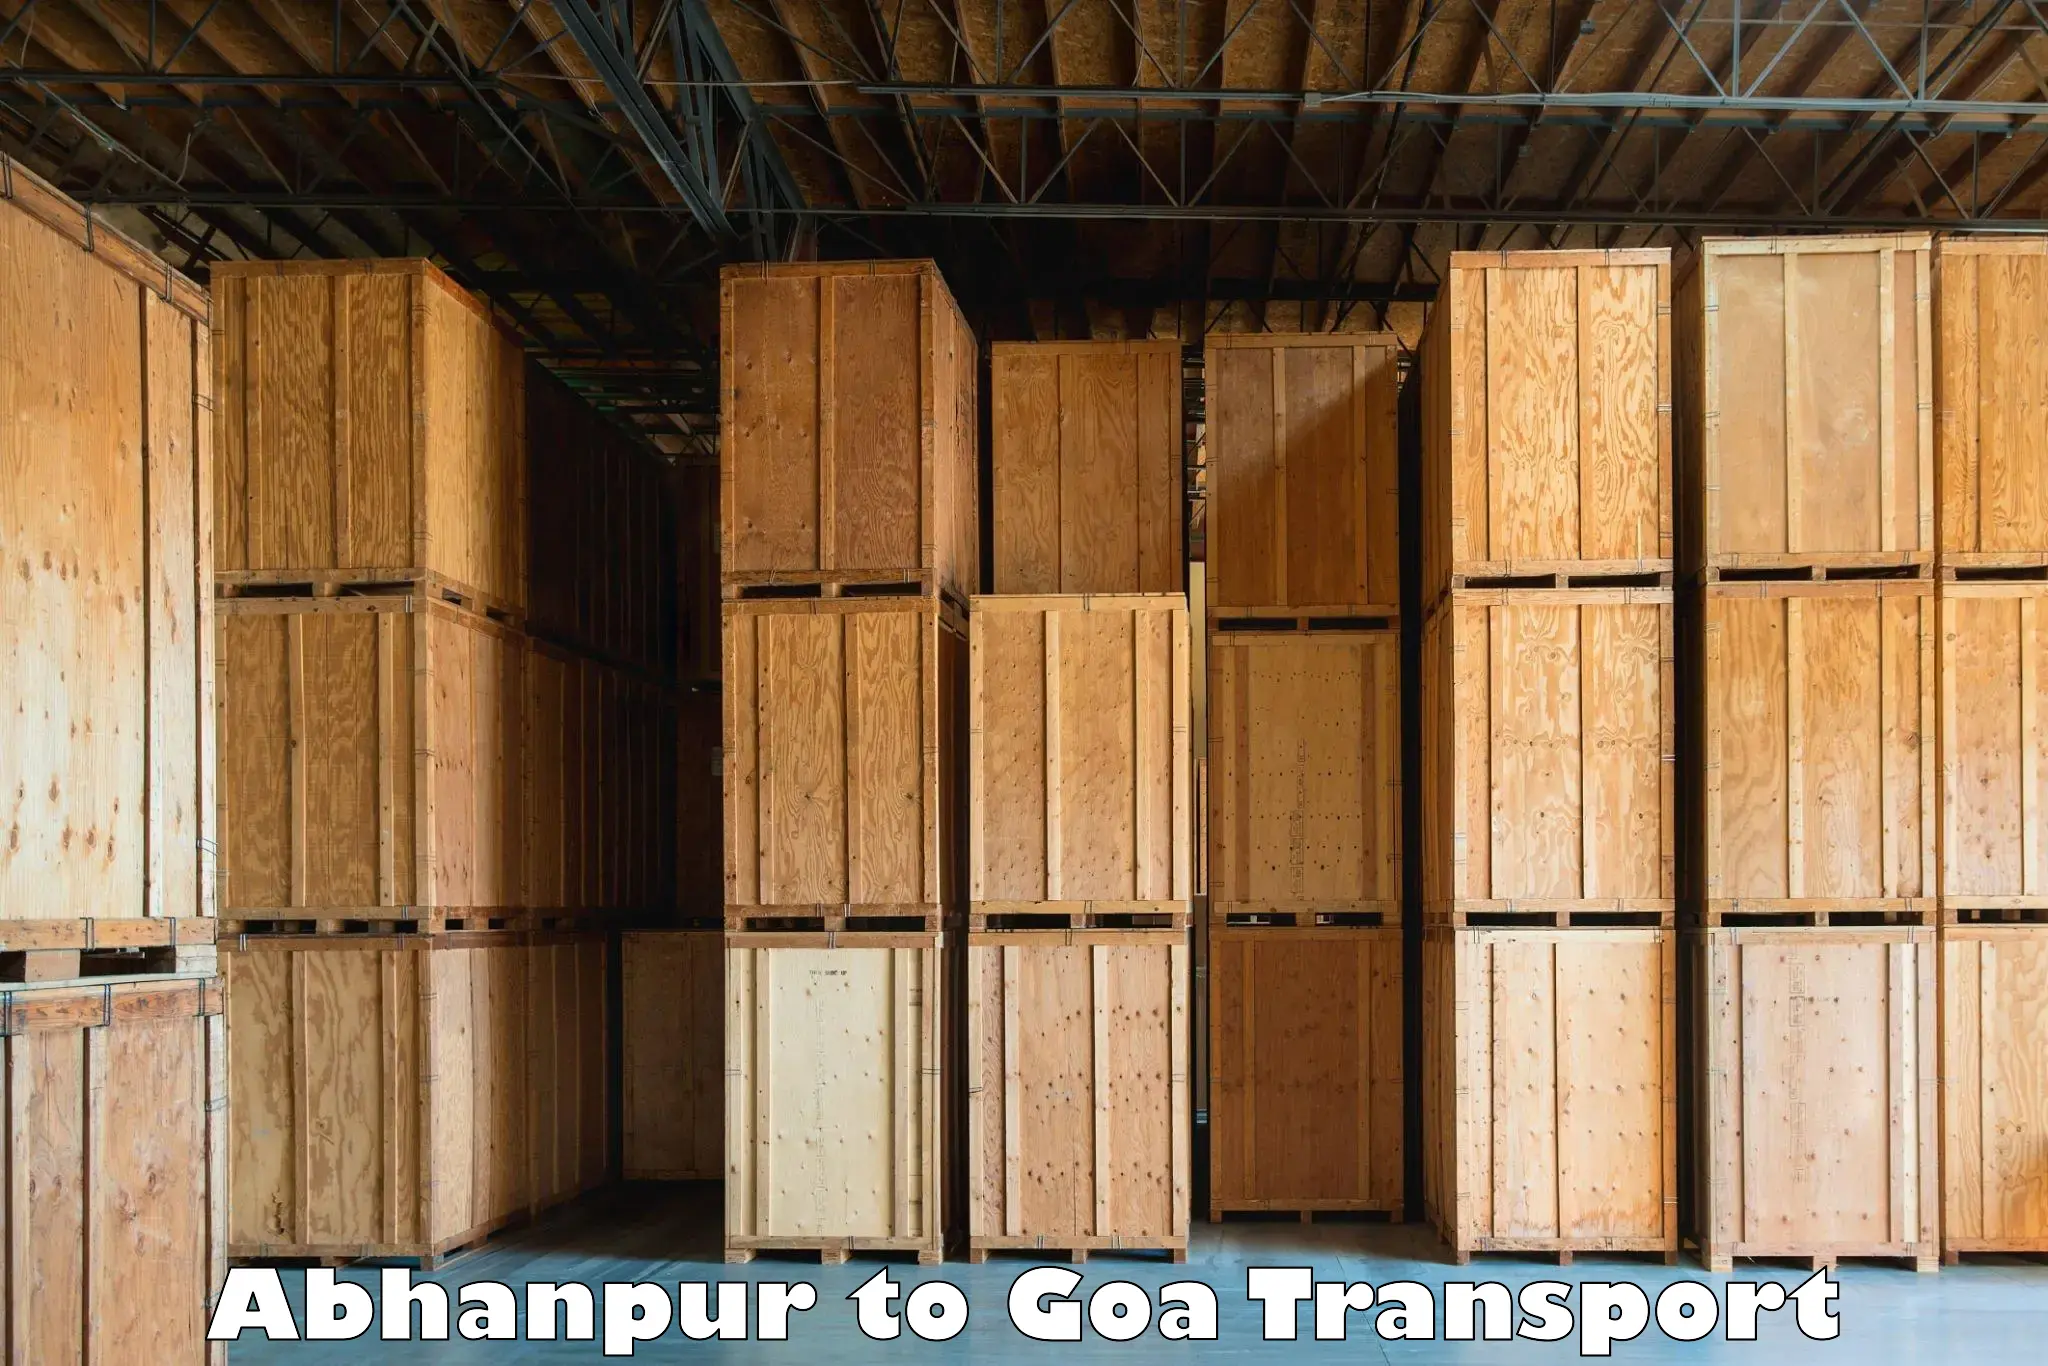 Cycle transportation service Abhanpur to Goa